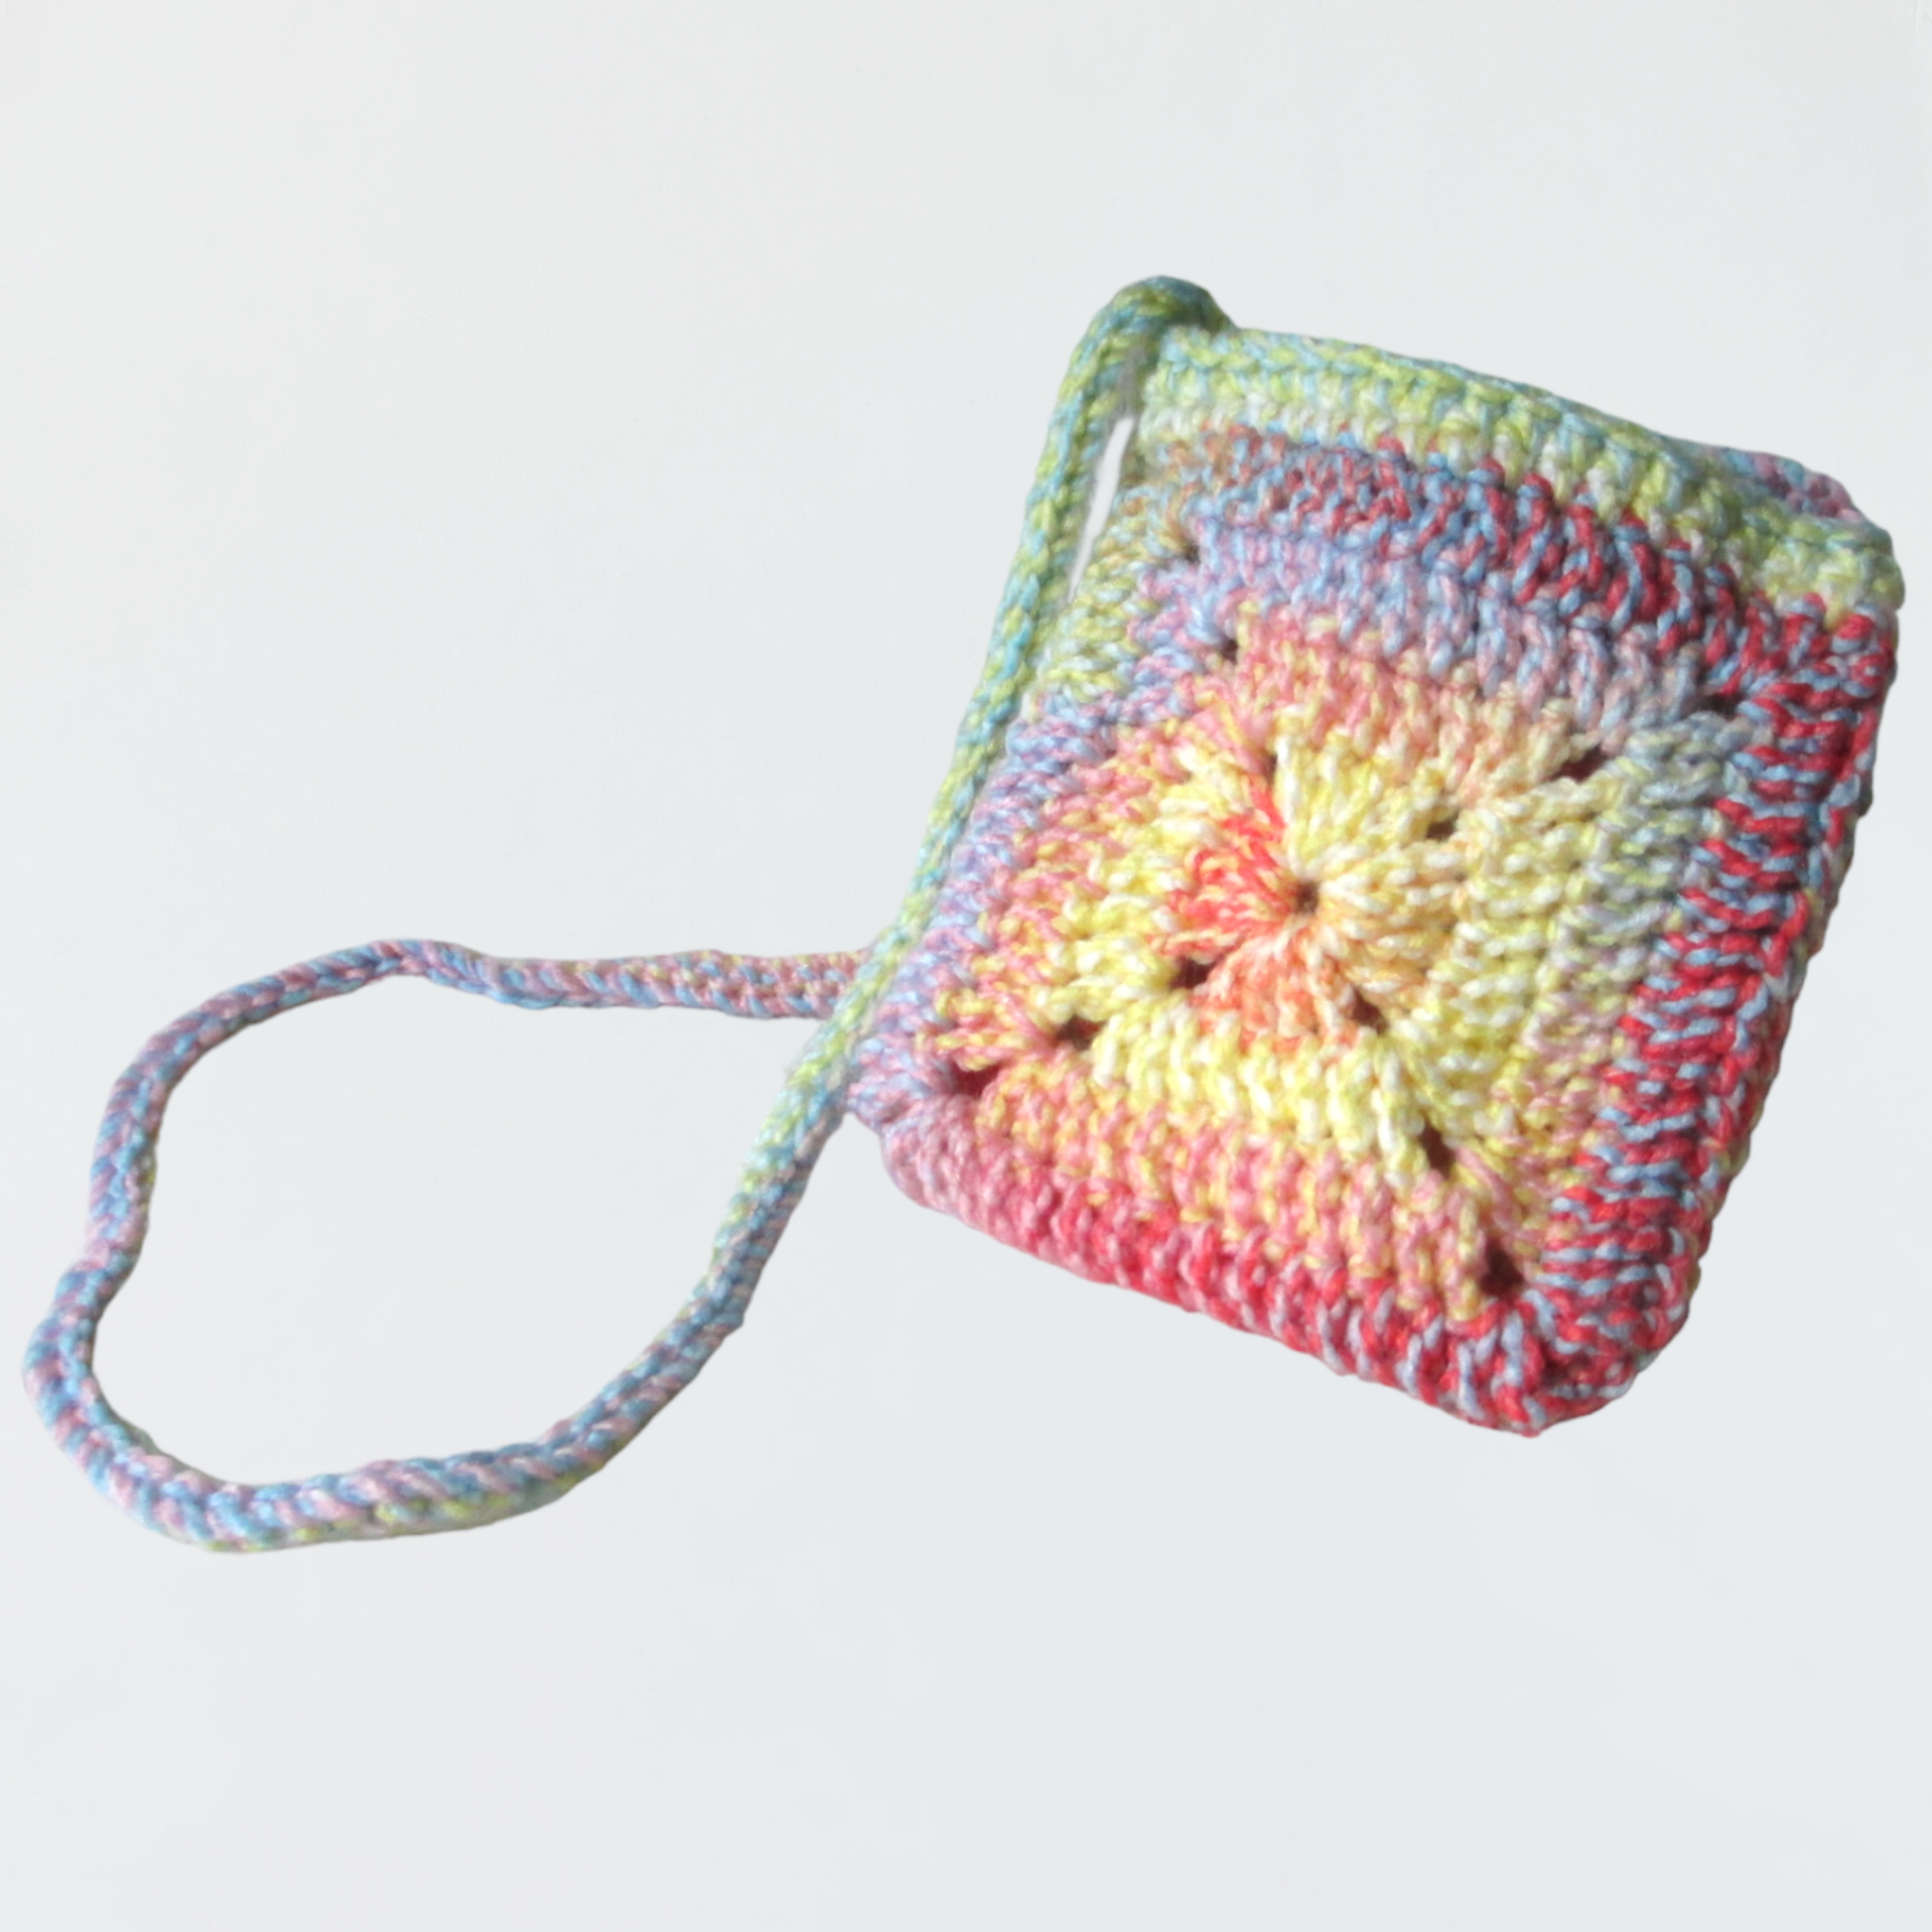 Hand crochet, and beautifully made.  Handmade by Chetta can create anything for you!    https://www.allhandmadesa.com